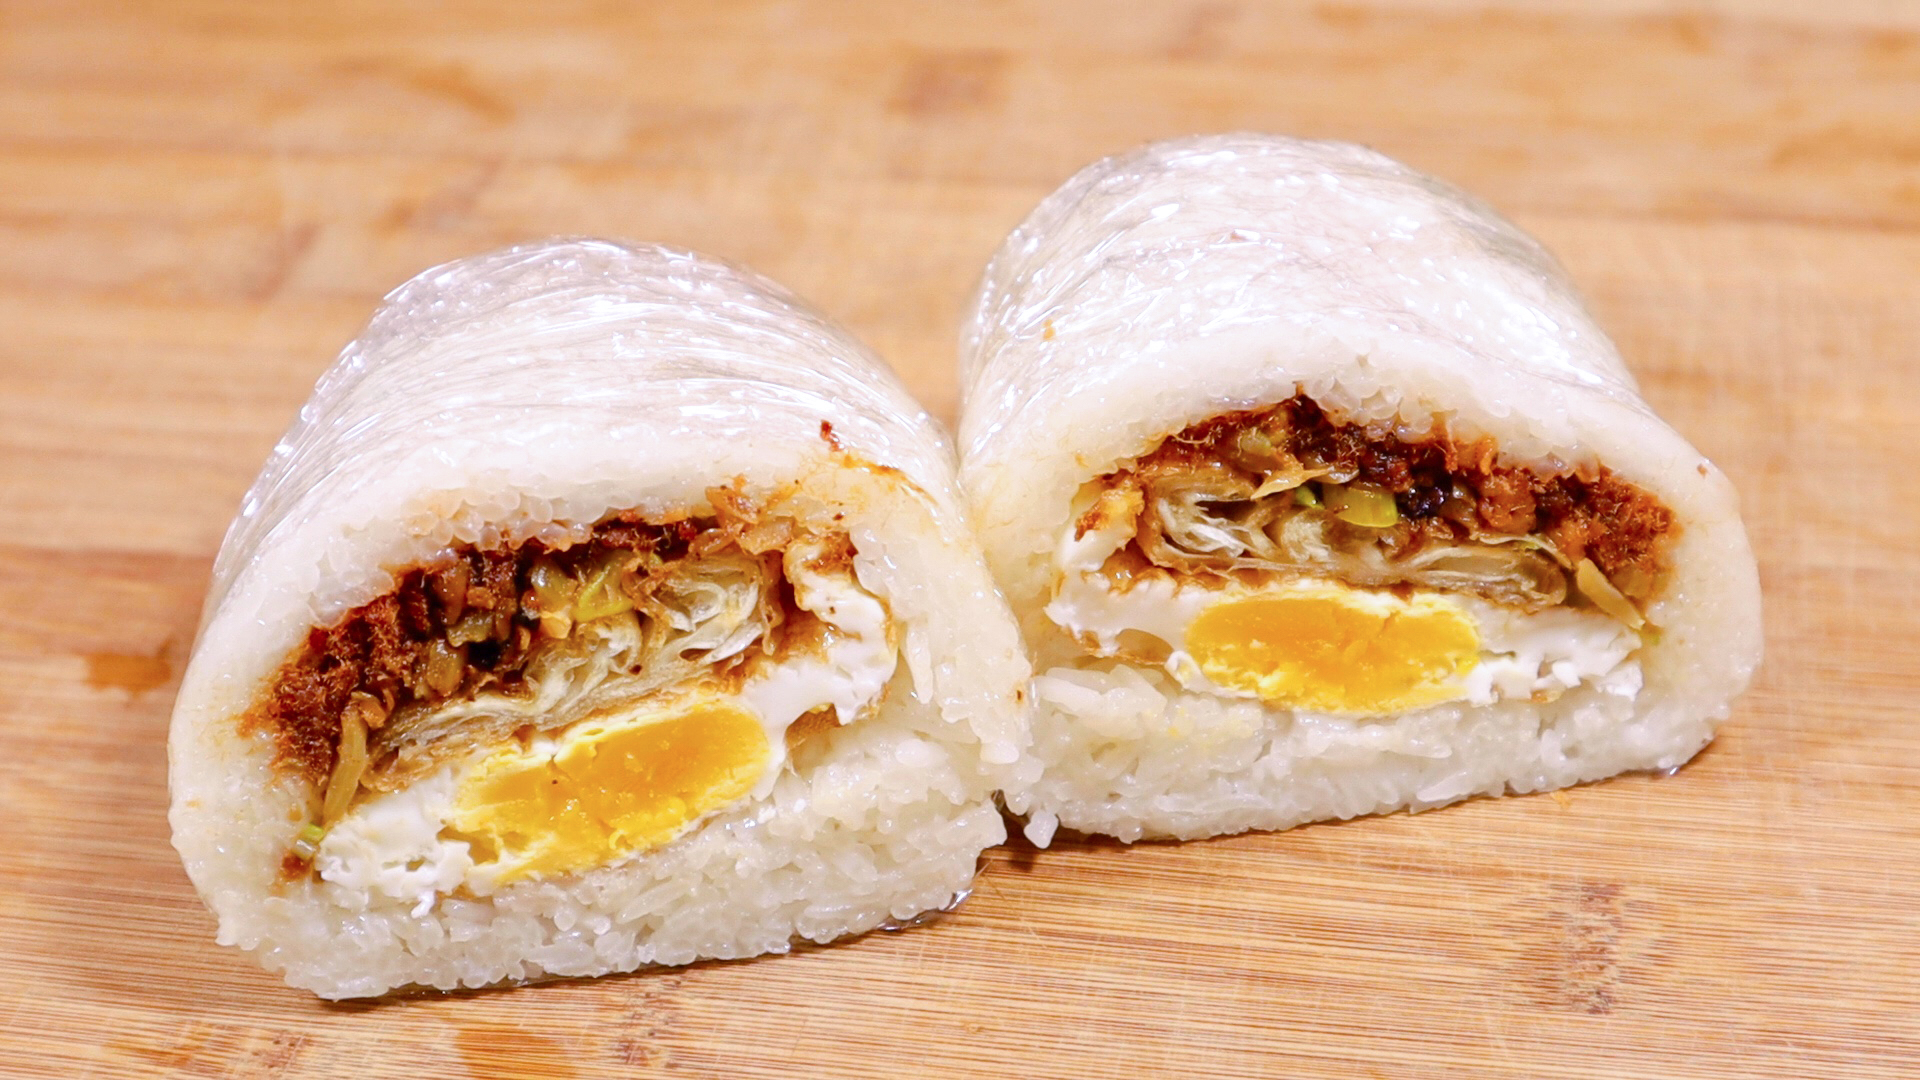 Two halves of a rice ball with meat, egg, and vegetable filling on a wooden surface